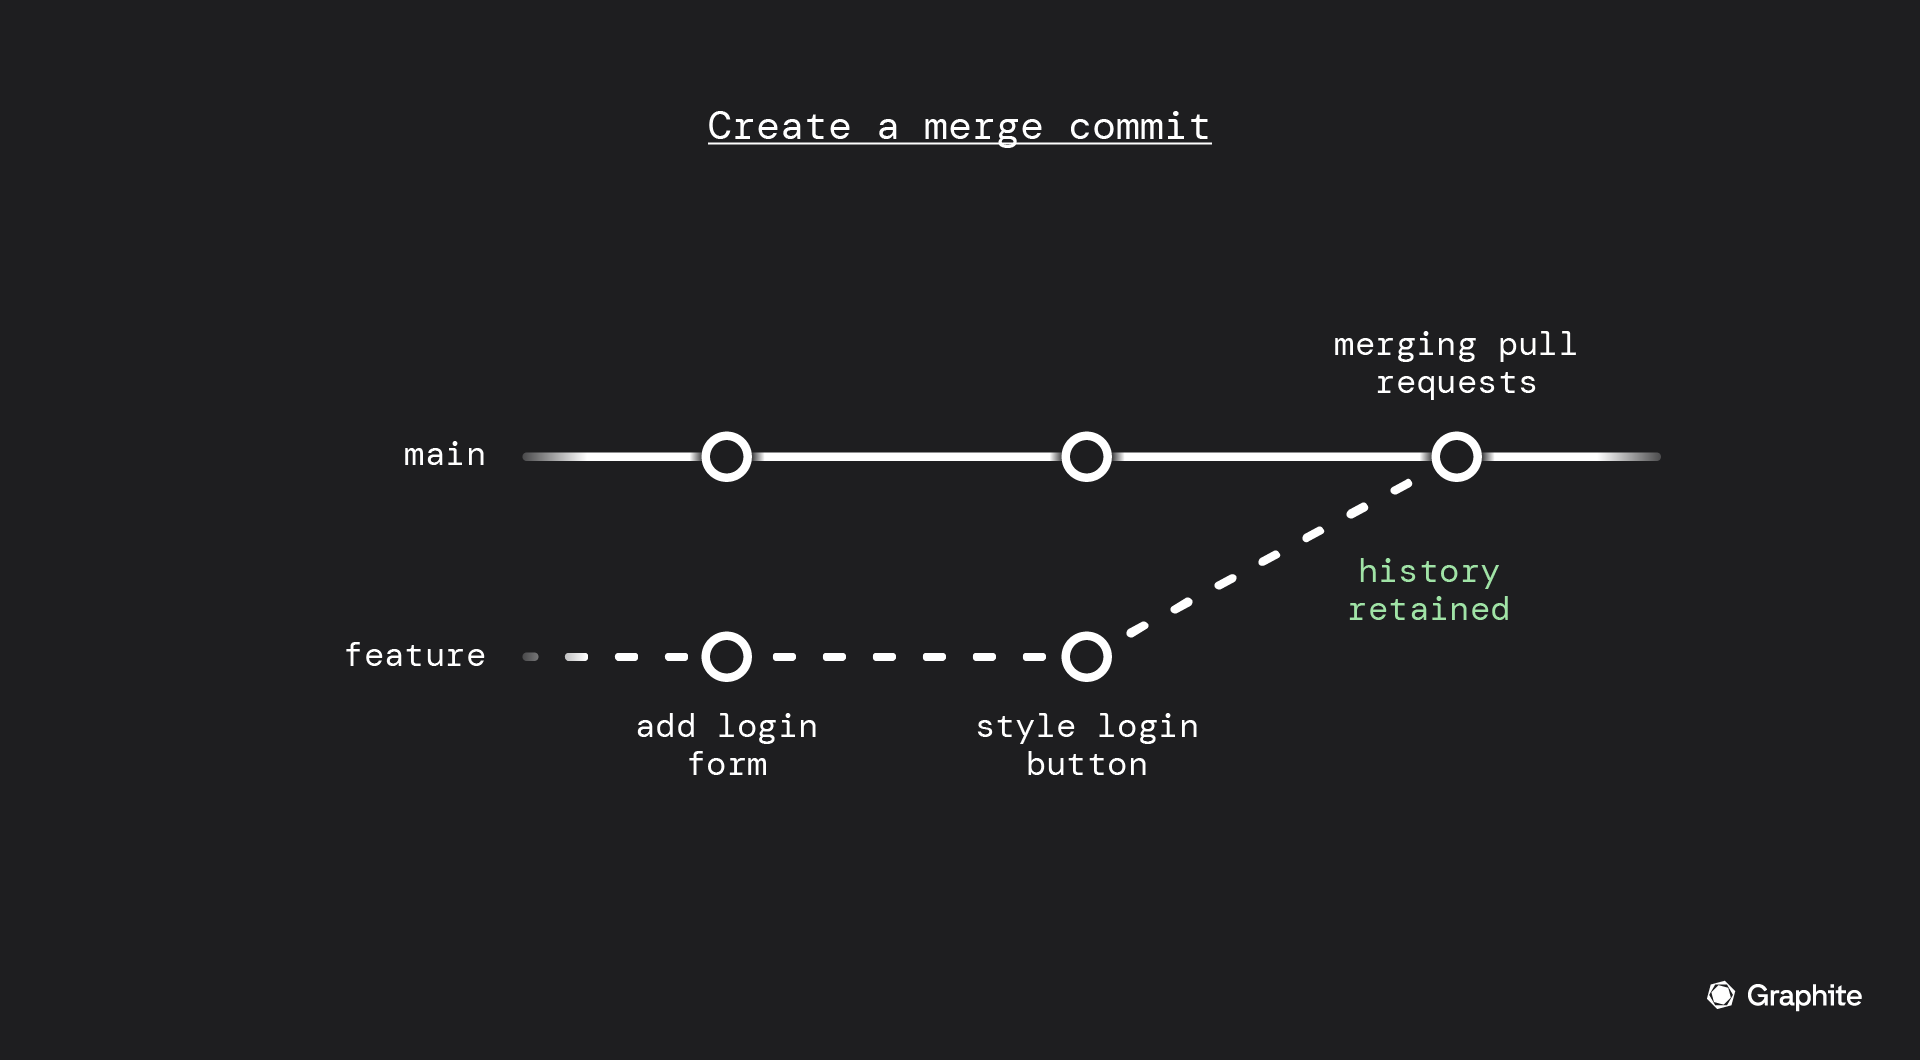 A merge commit diagram with a feature from main commit showing add login form, style login button, mering PR, history retained